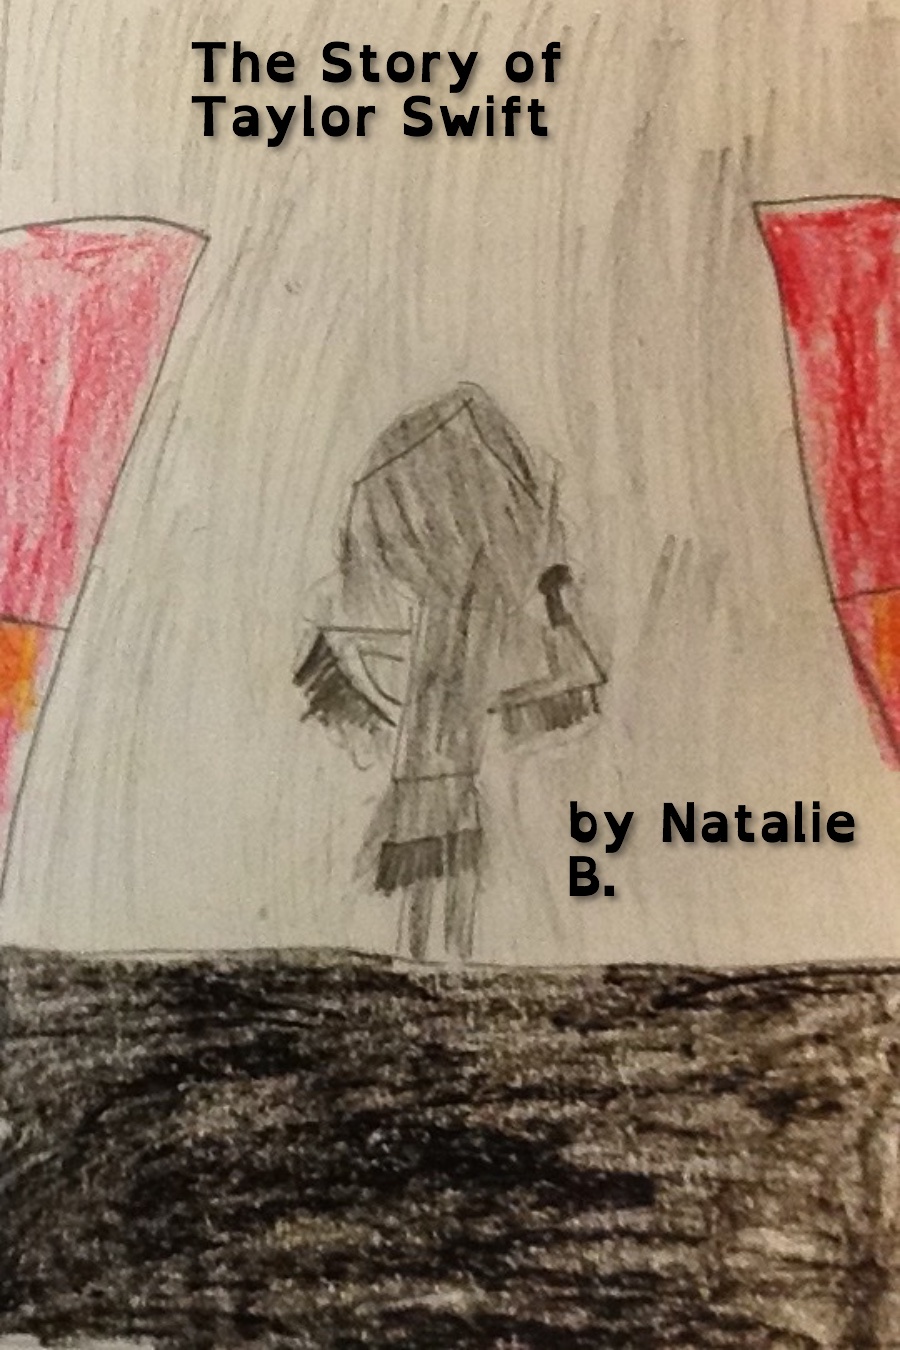 The Story of Taylor Swift by Natalie B